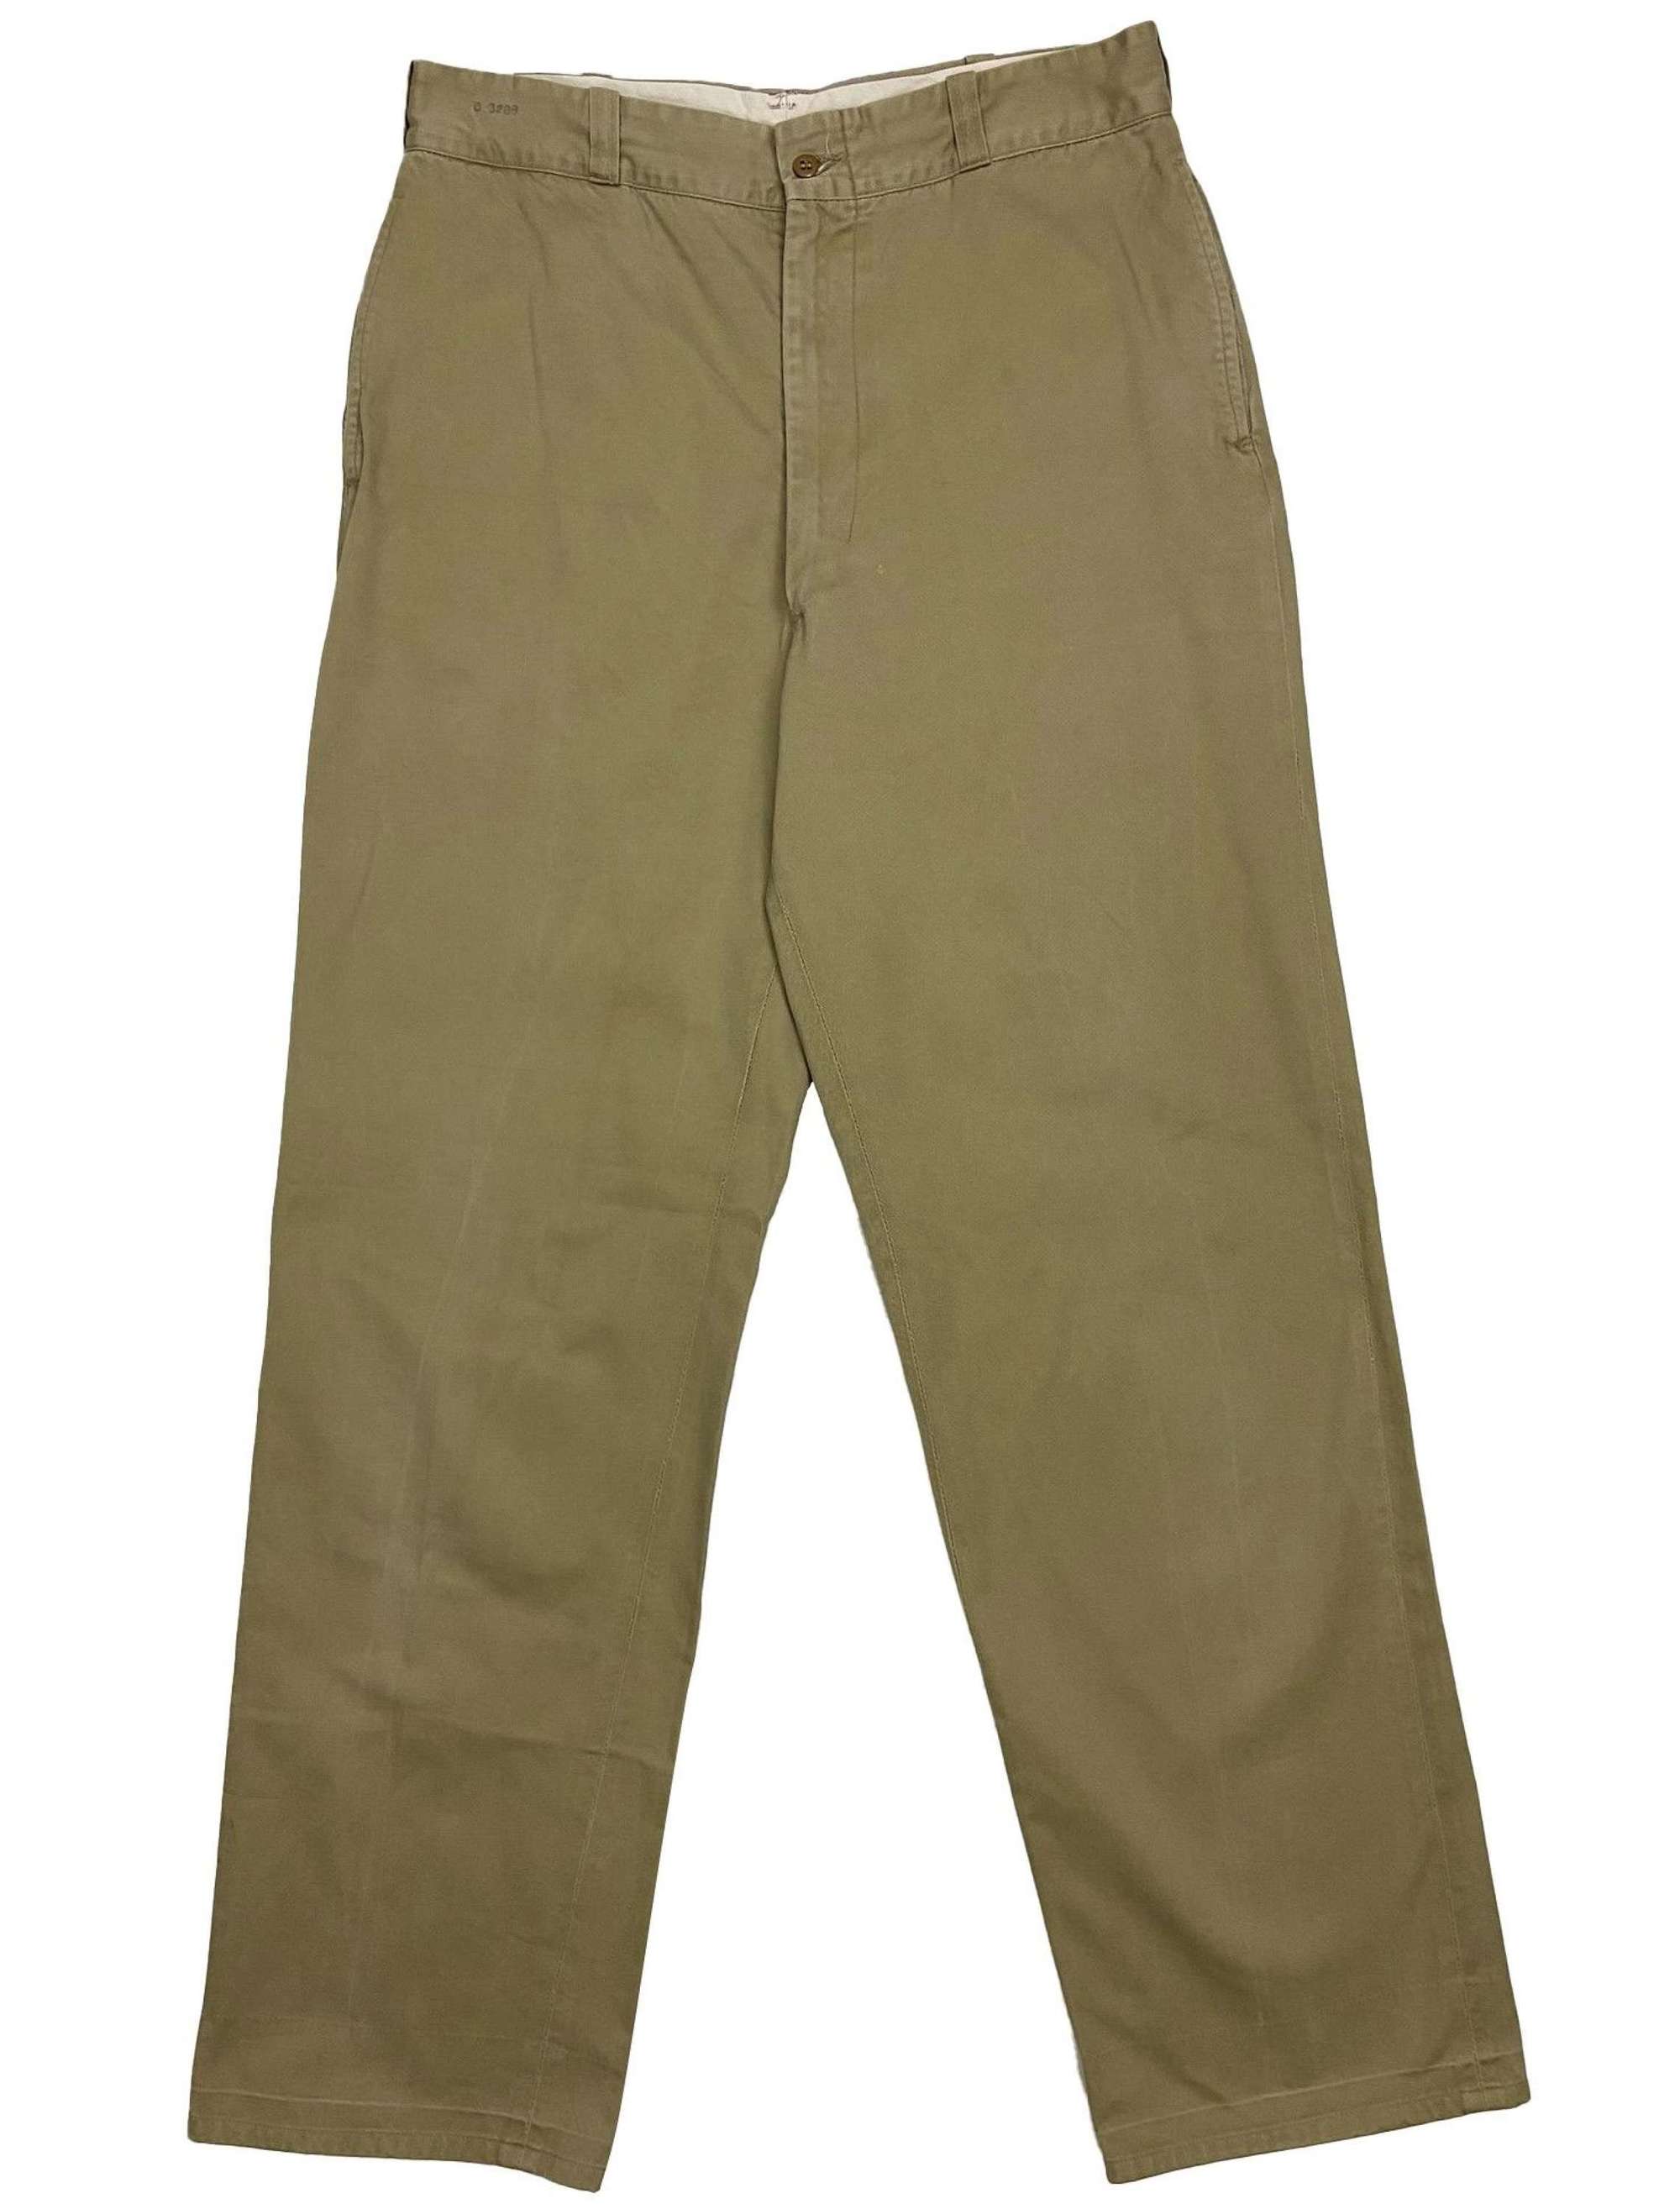 Original 1967 Dated US Army Chinos Trousers 34x33